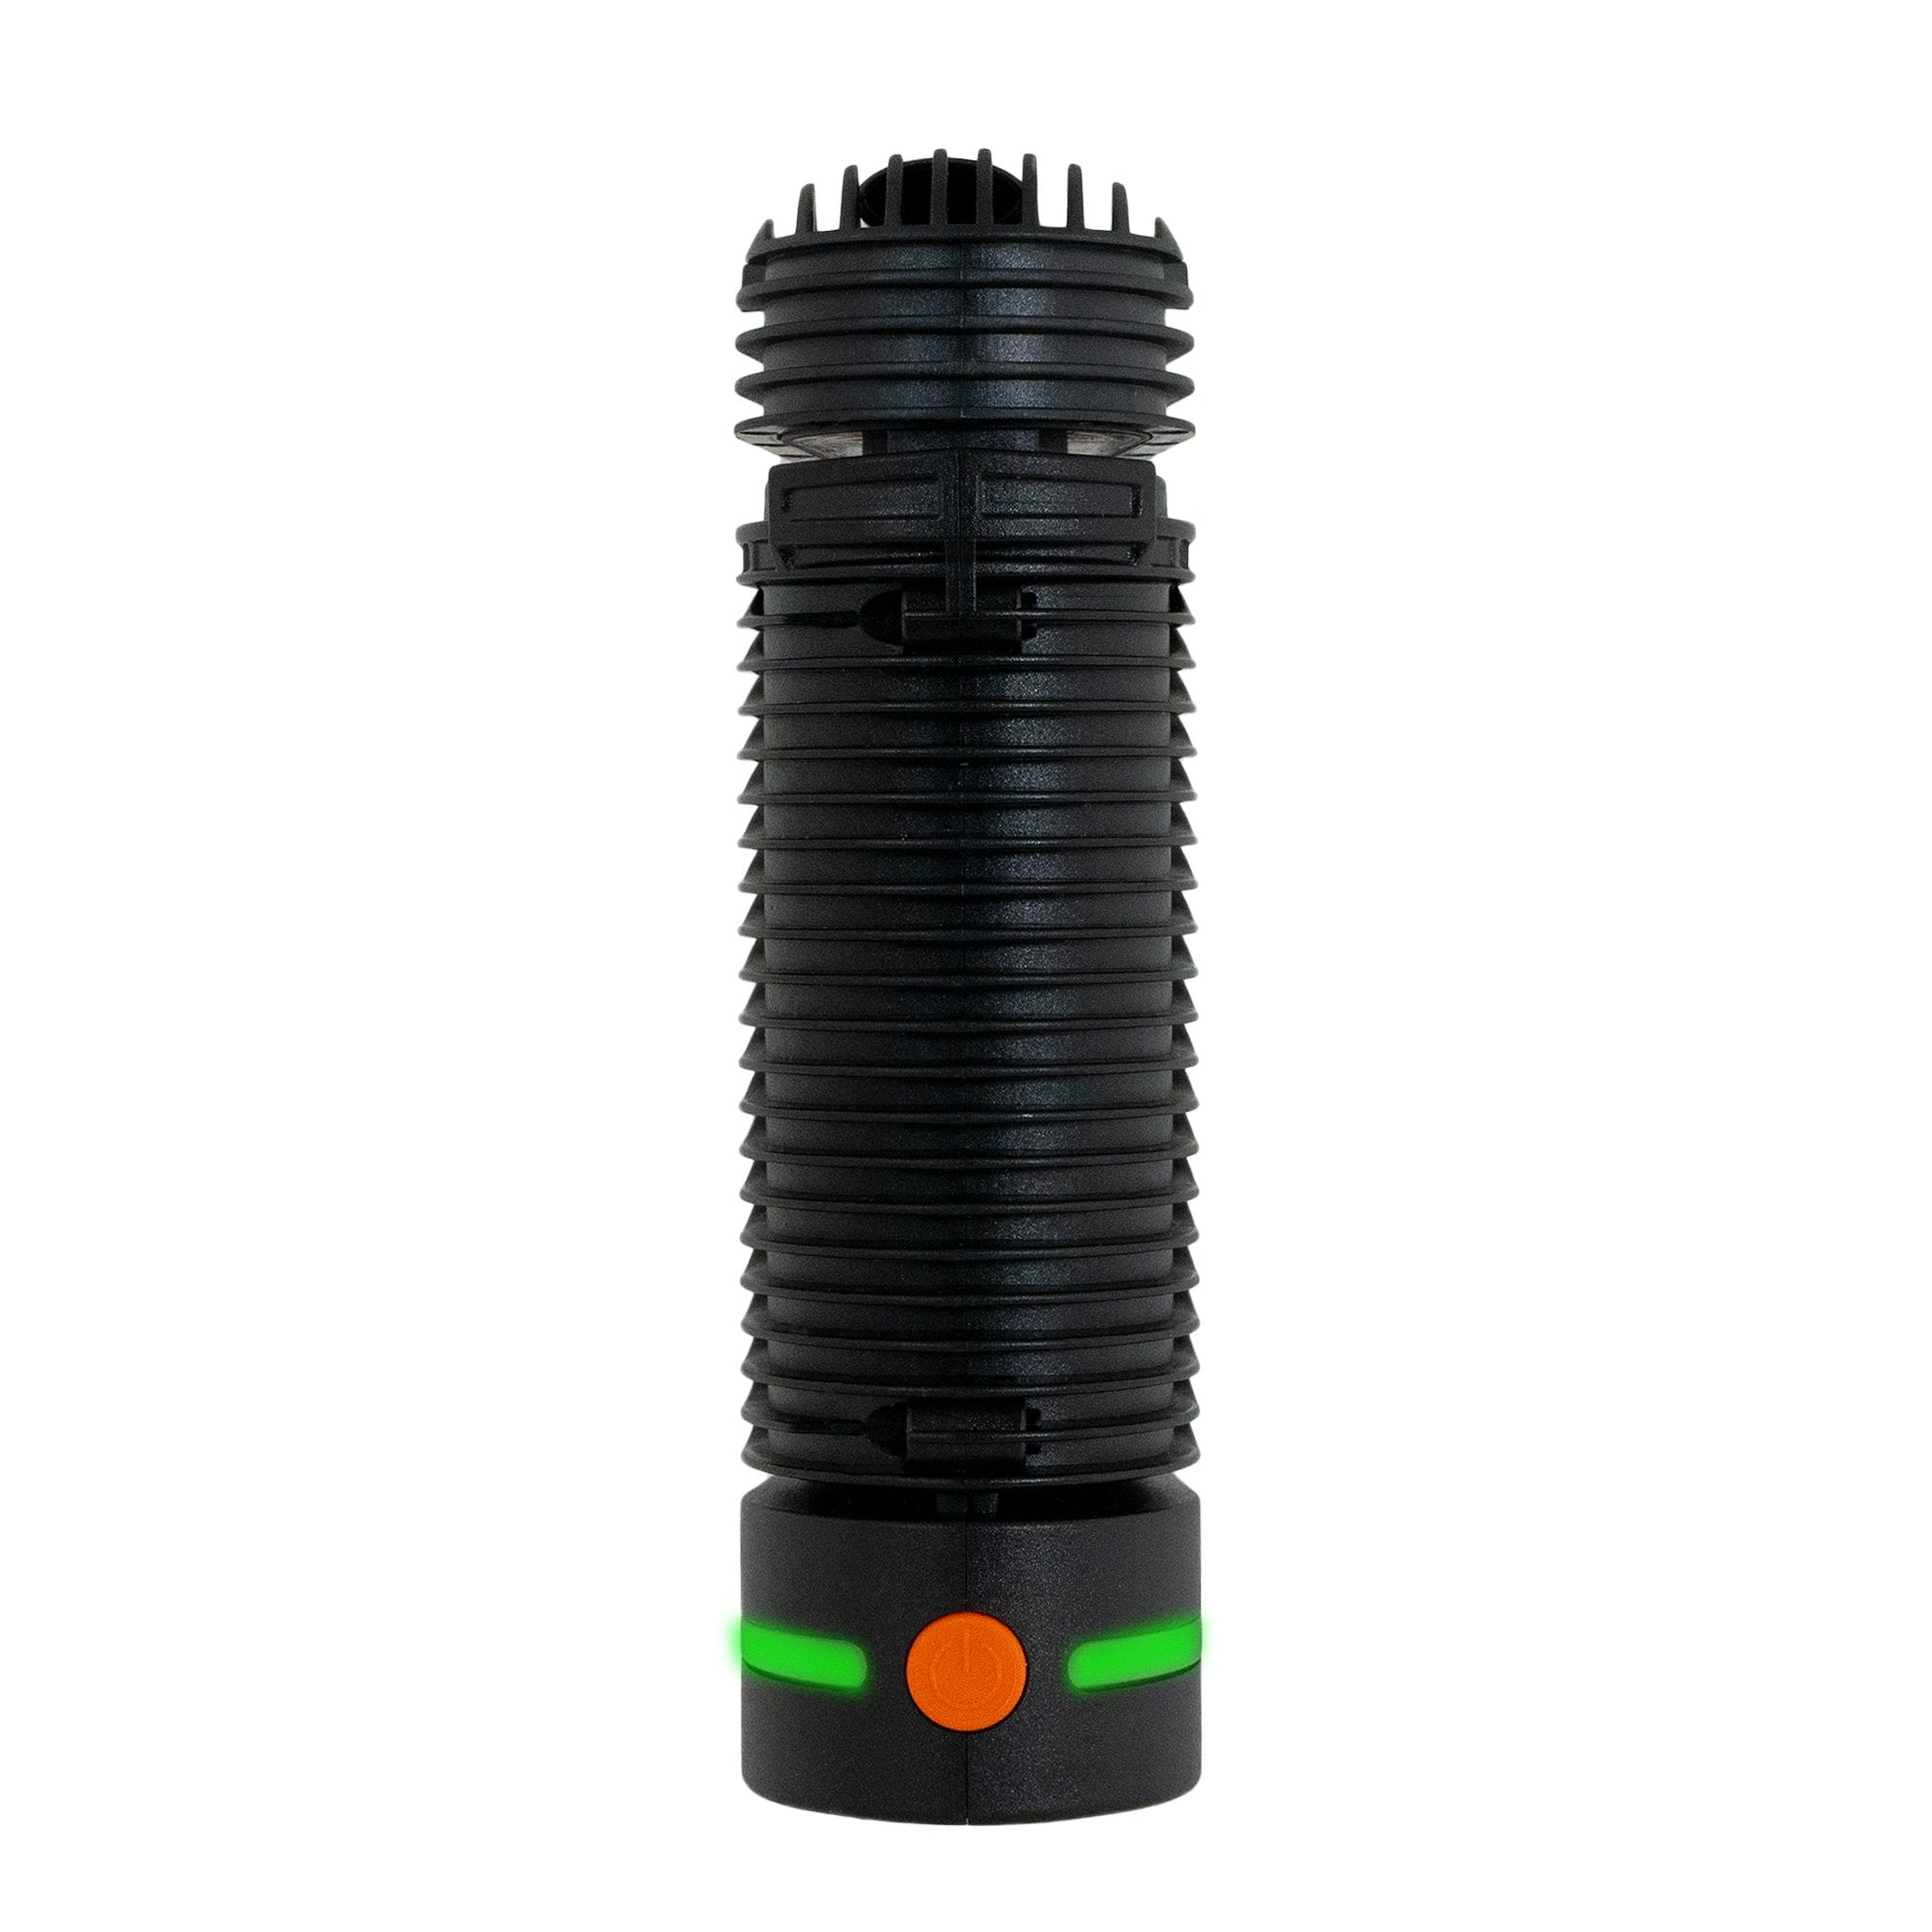 Crafty Plus Vaporizer by Storz & Bickel – PuffItUp